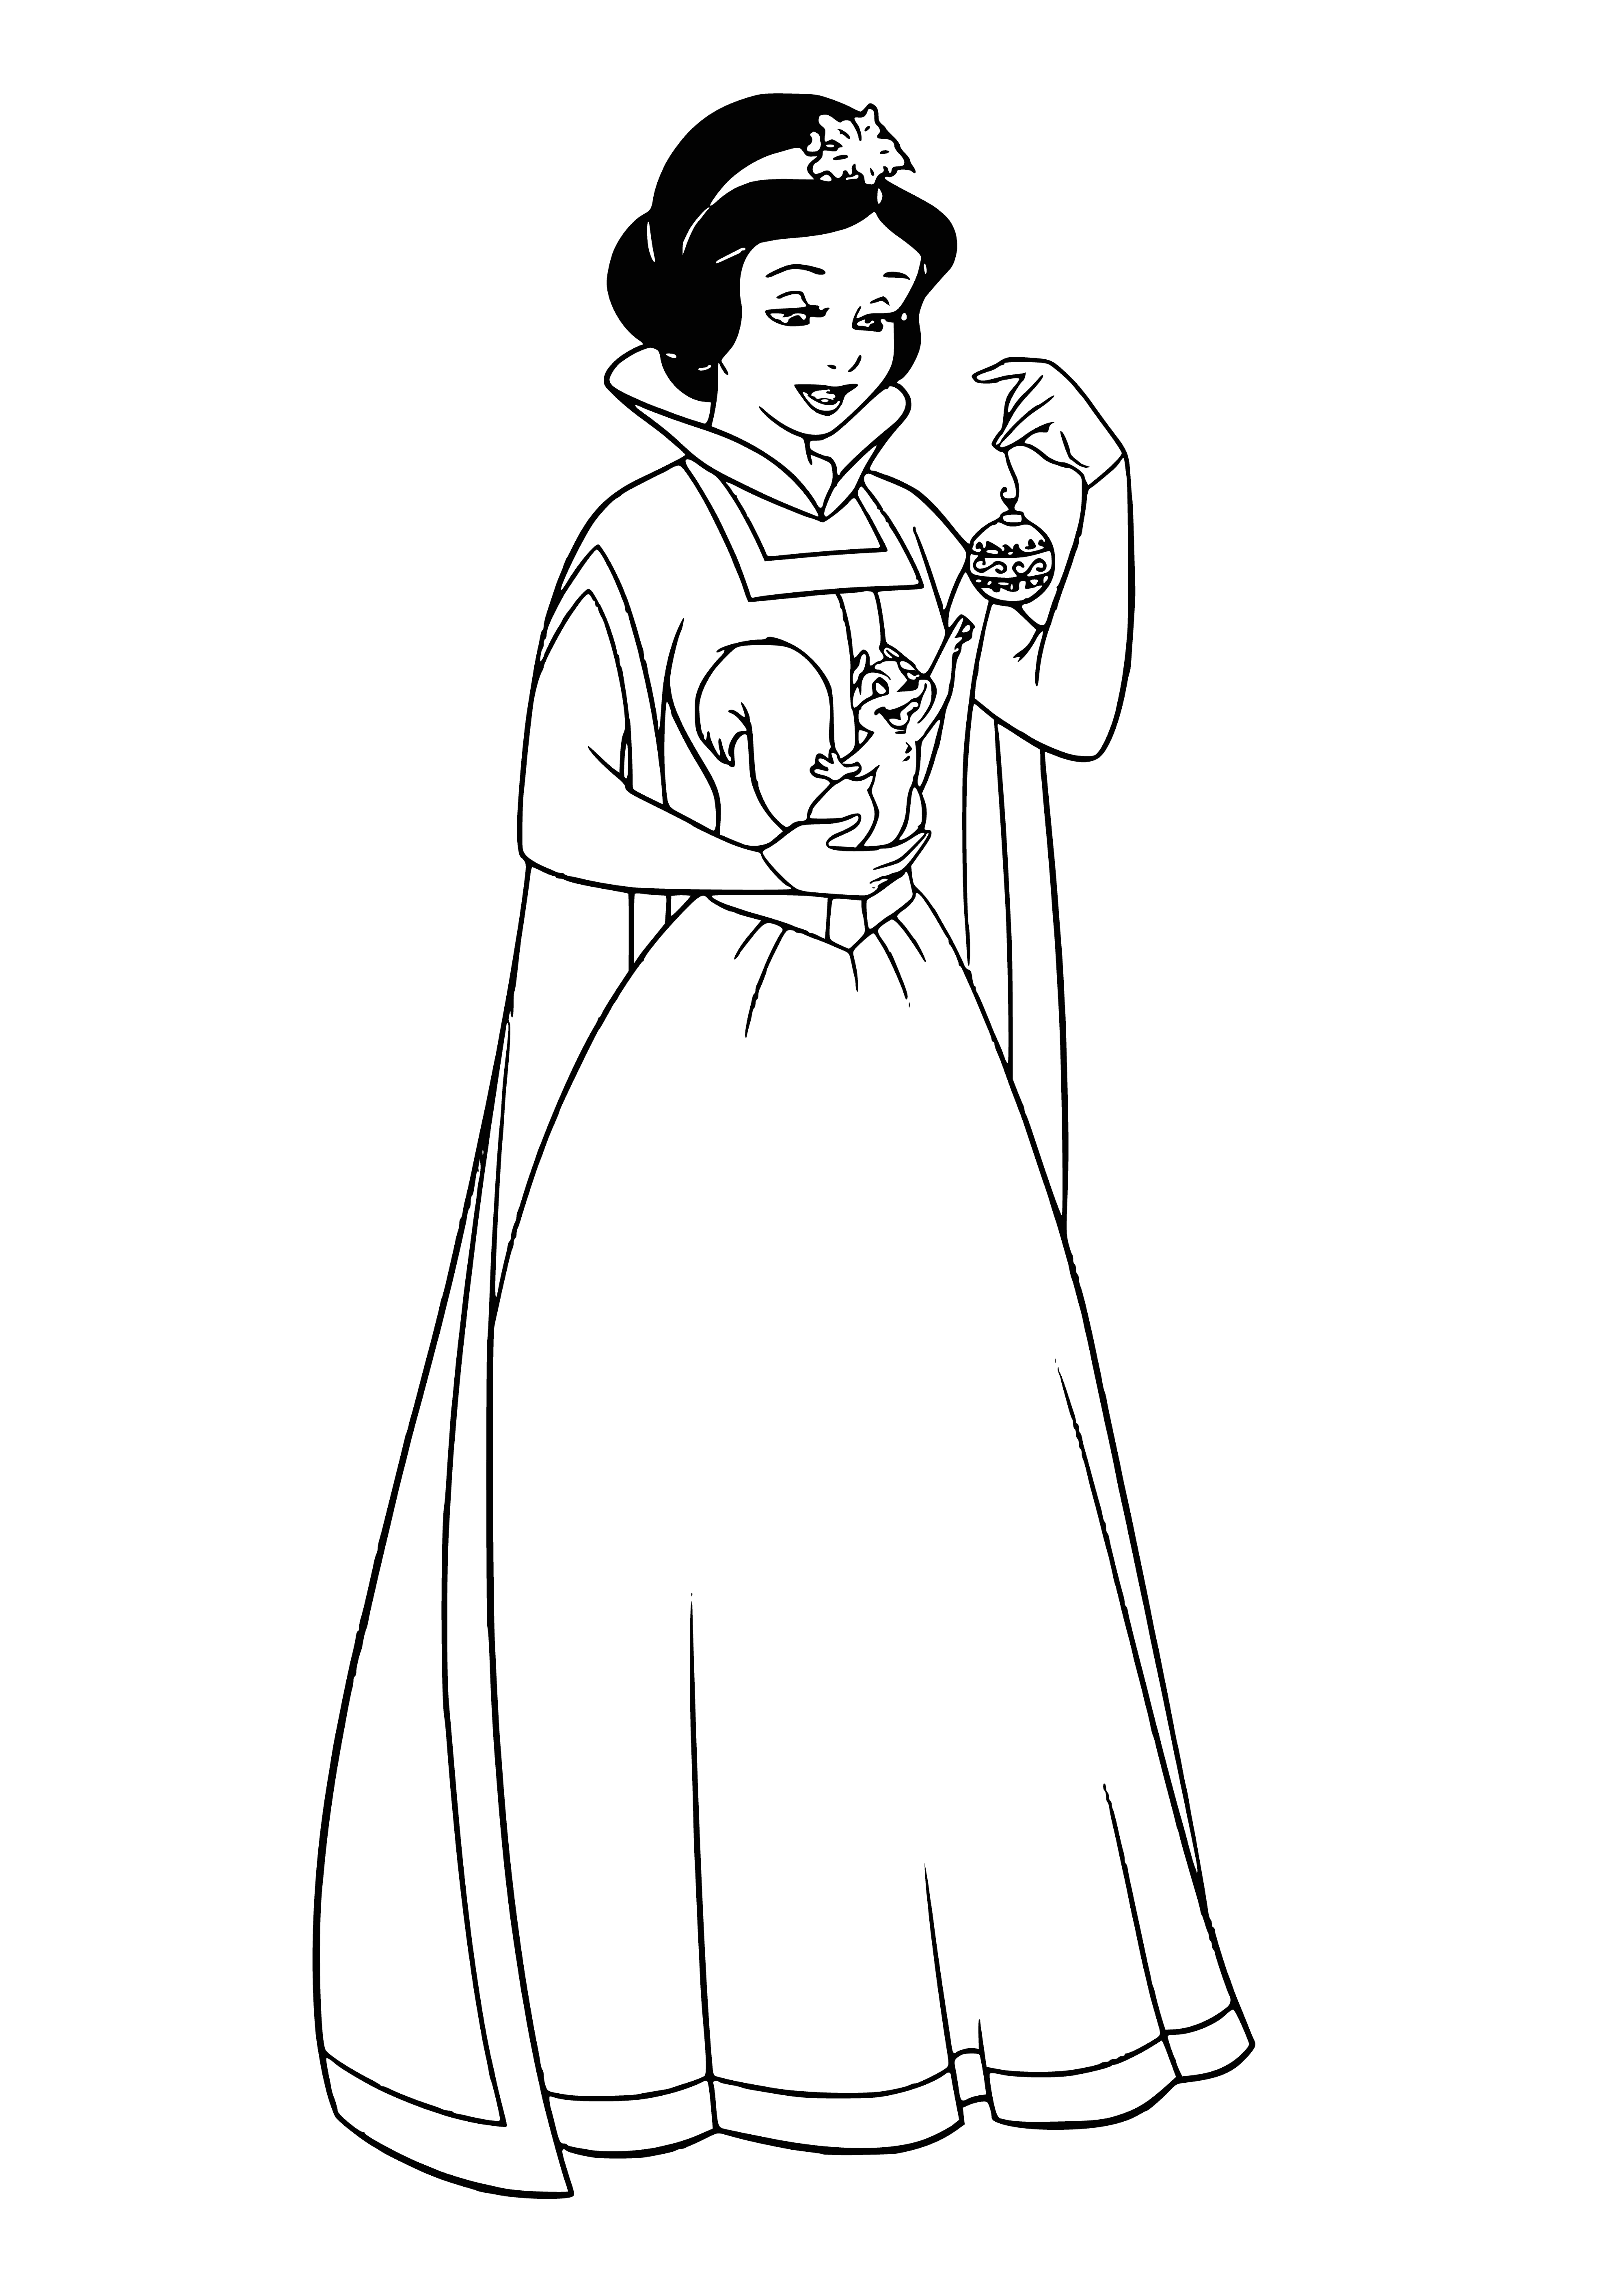 coloring page: The Disney princesses are excitedly celebrating the New Year with a Christmas ball!